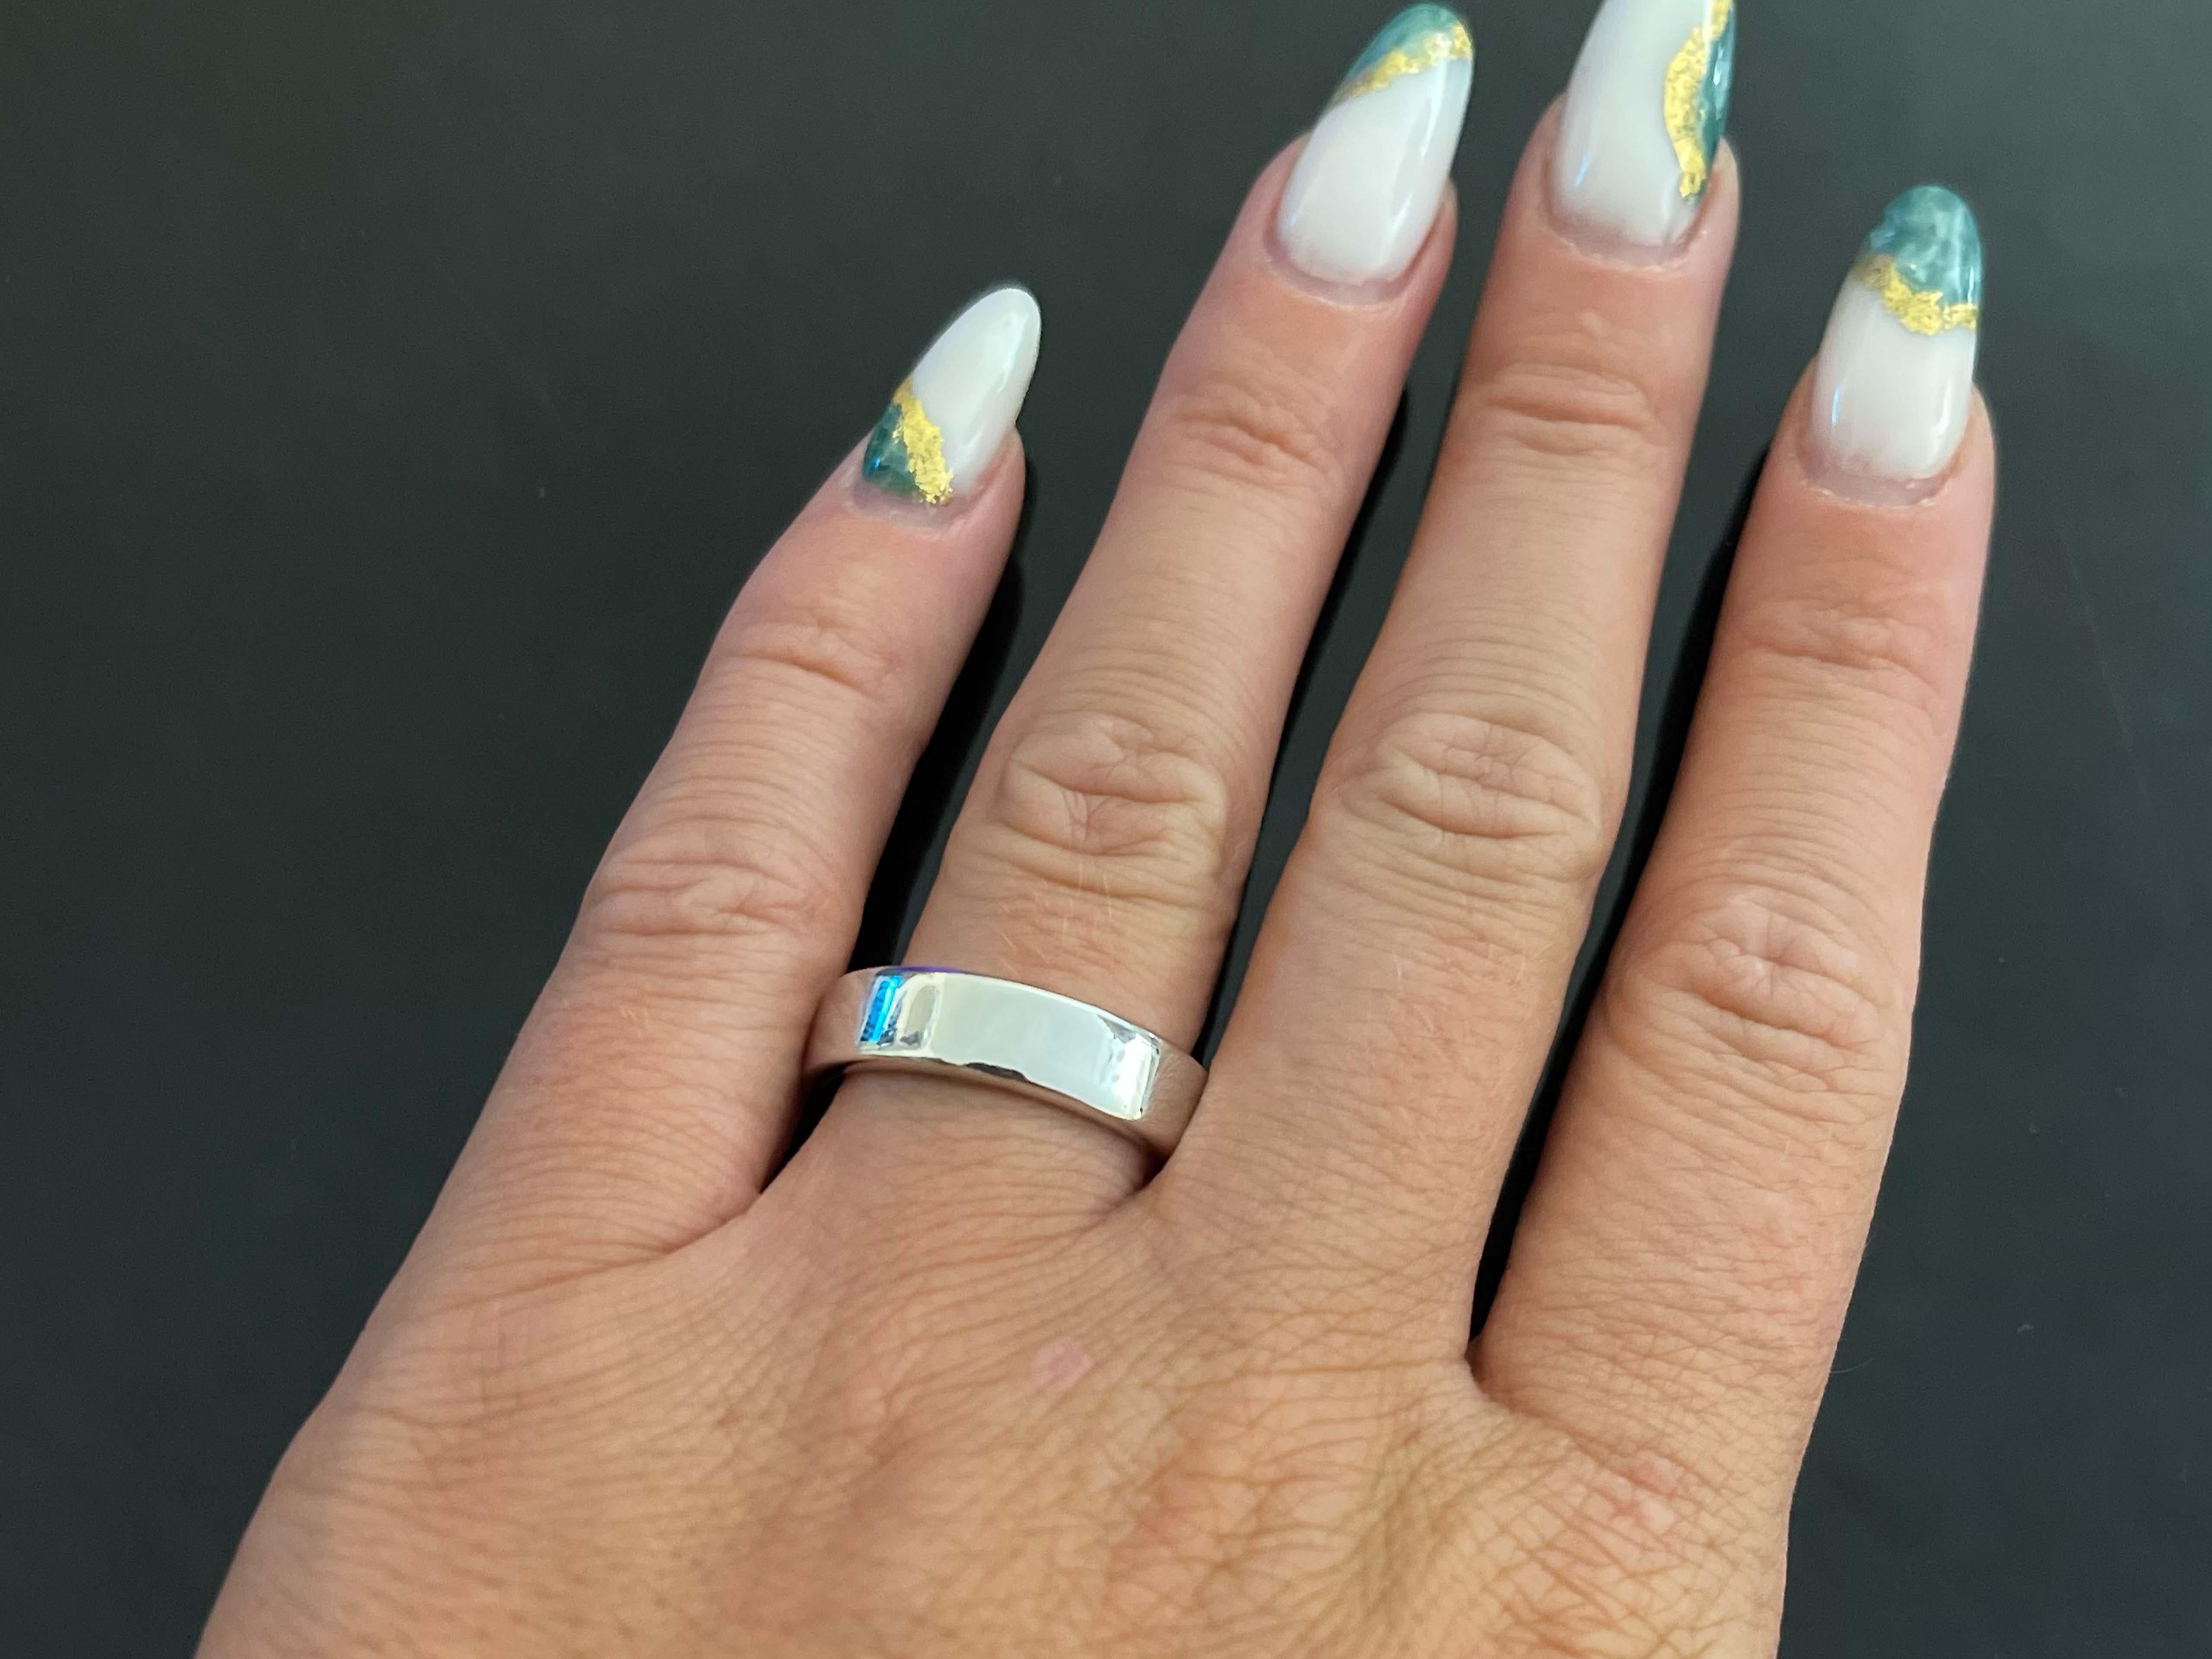 Hearts on Fire Wedding Band Ring in 18k White Gold 6mm. This band is beautifully crafted in 18k white gold and has a high polish finish. The band is 6 mm wide and 2mm thick.  The band is hallmarked 